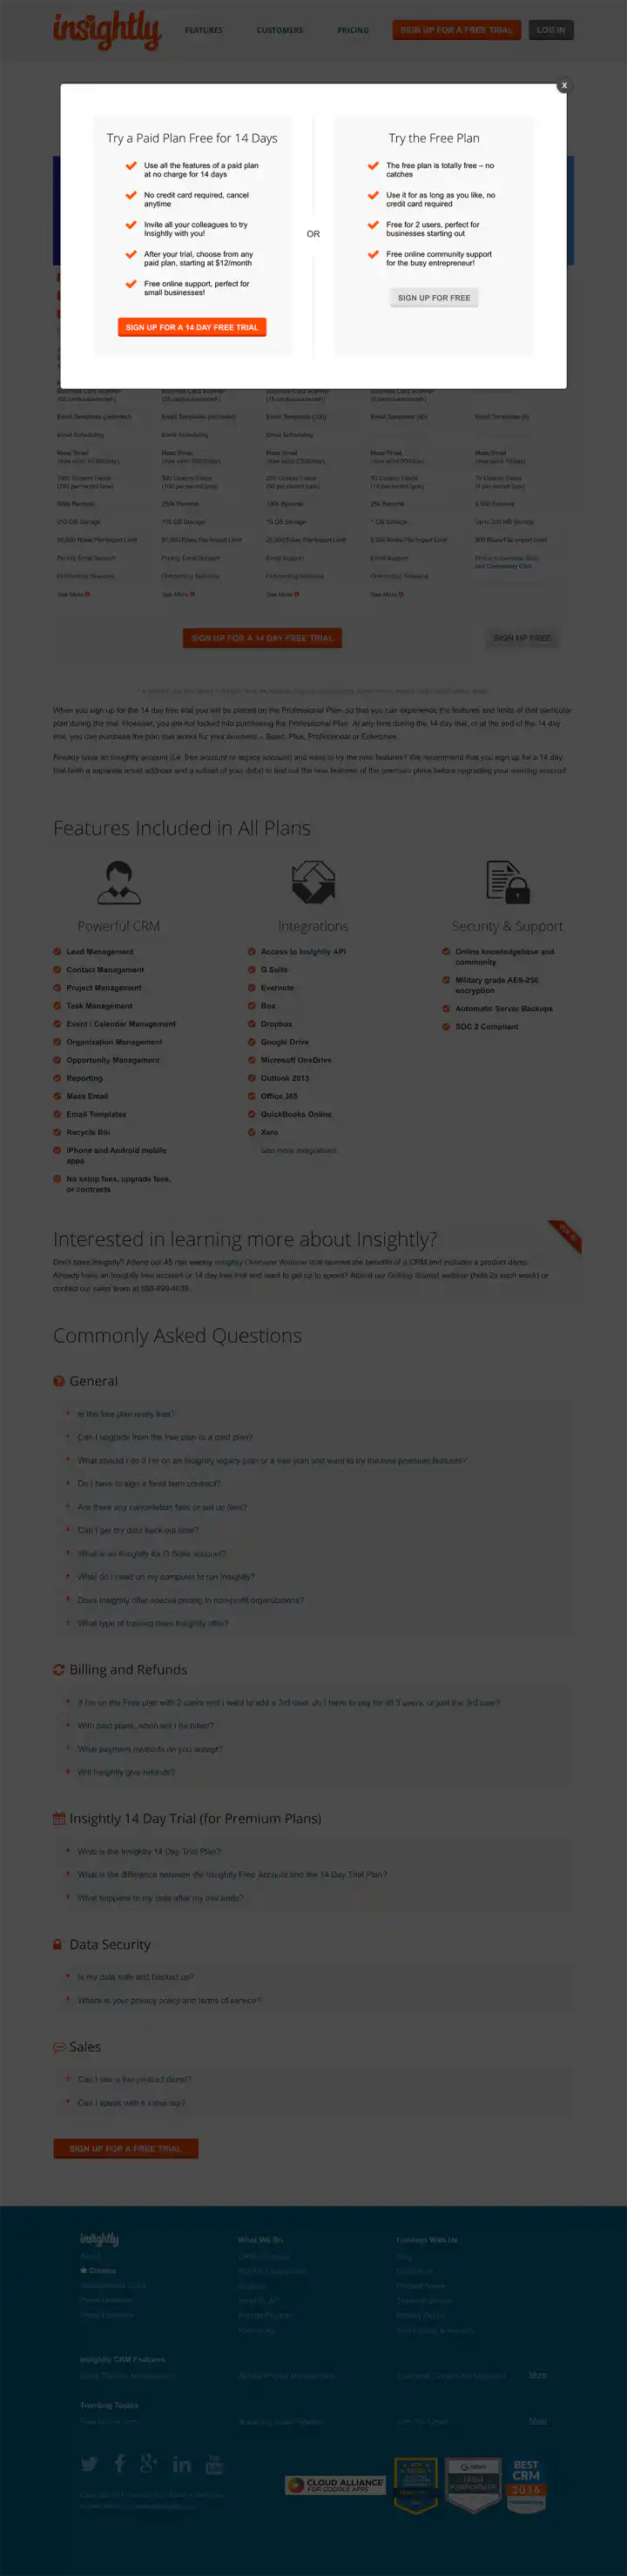 Screenshot Showing Pricing Page Overlay Used To Emphasize Difference Between The Two Signup Paths